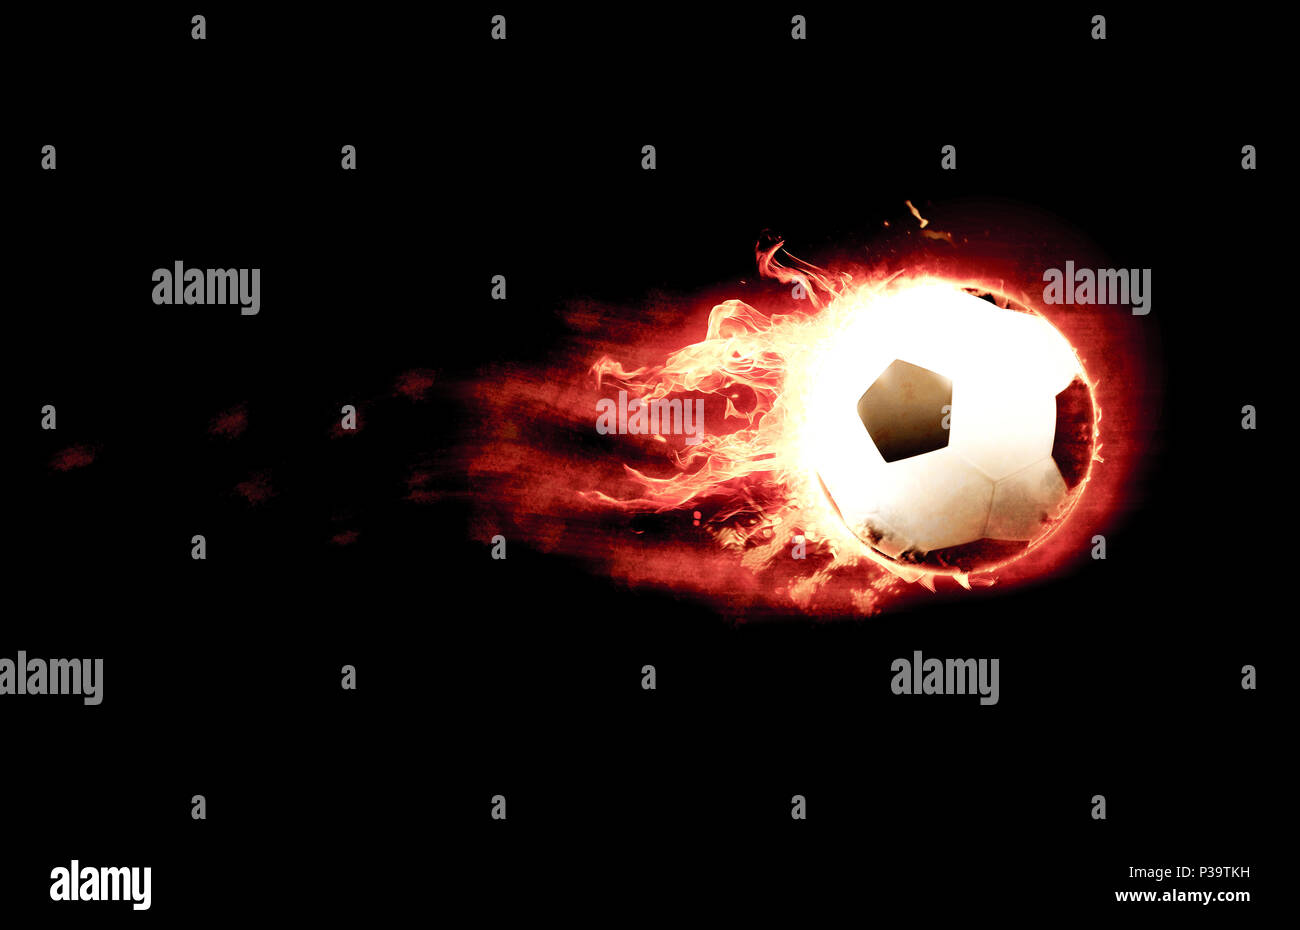 burning soccer ball with a tail of flames Stock Photo